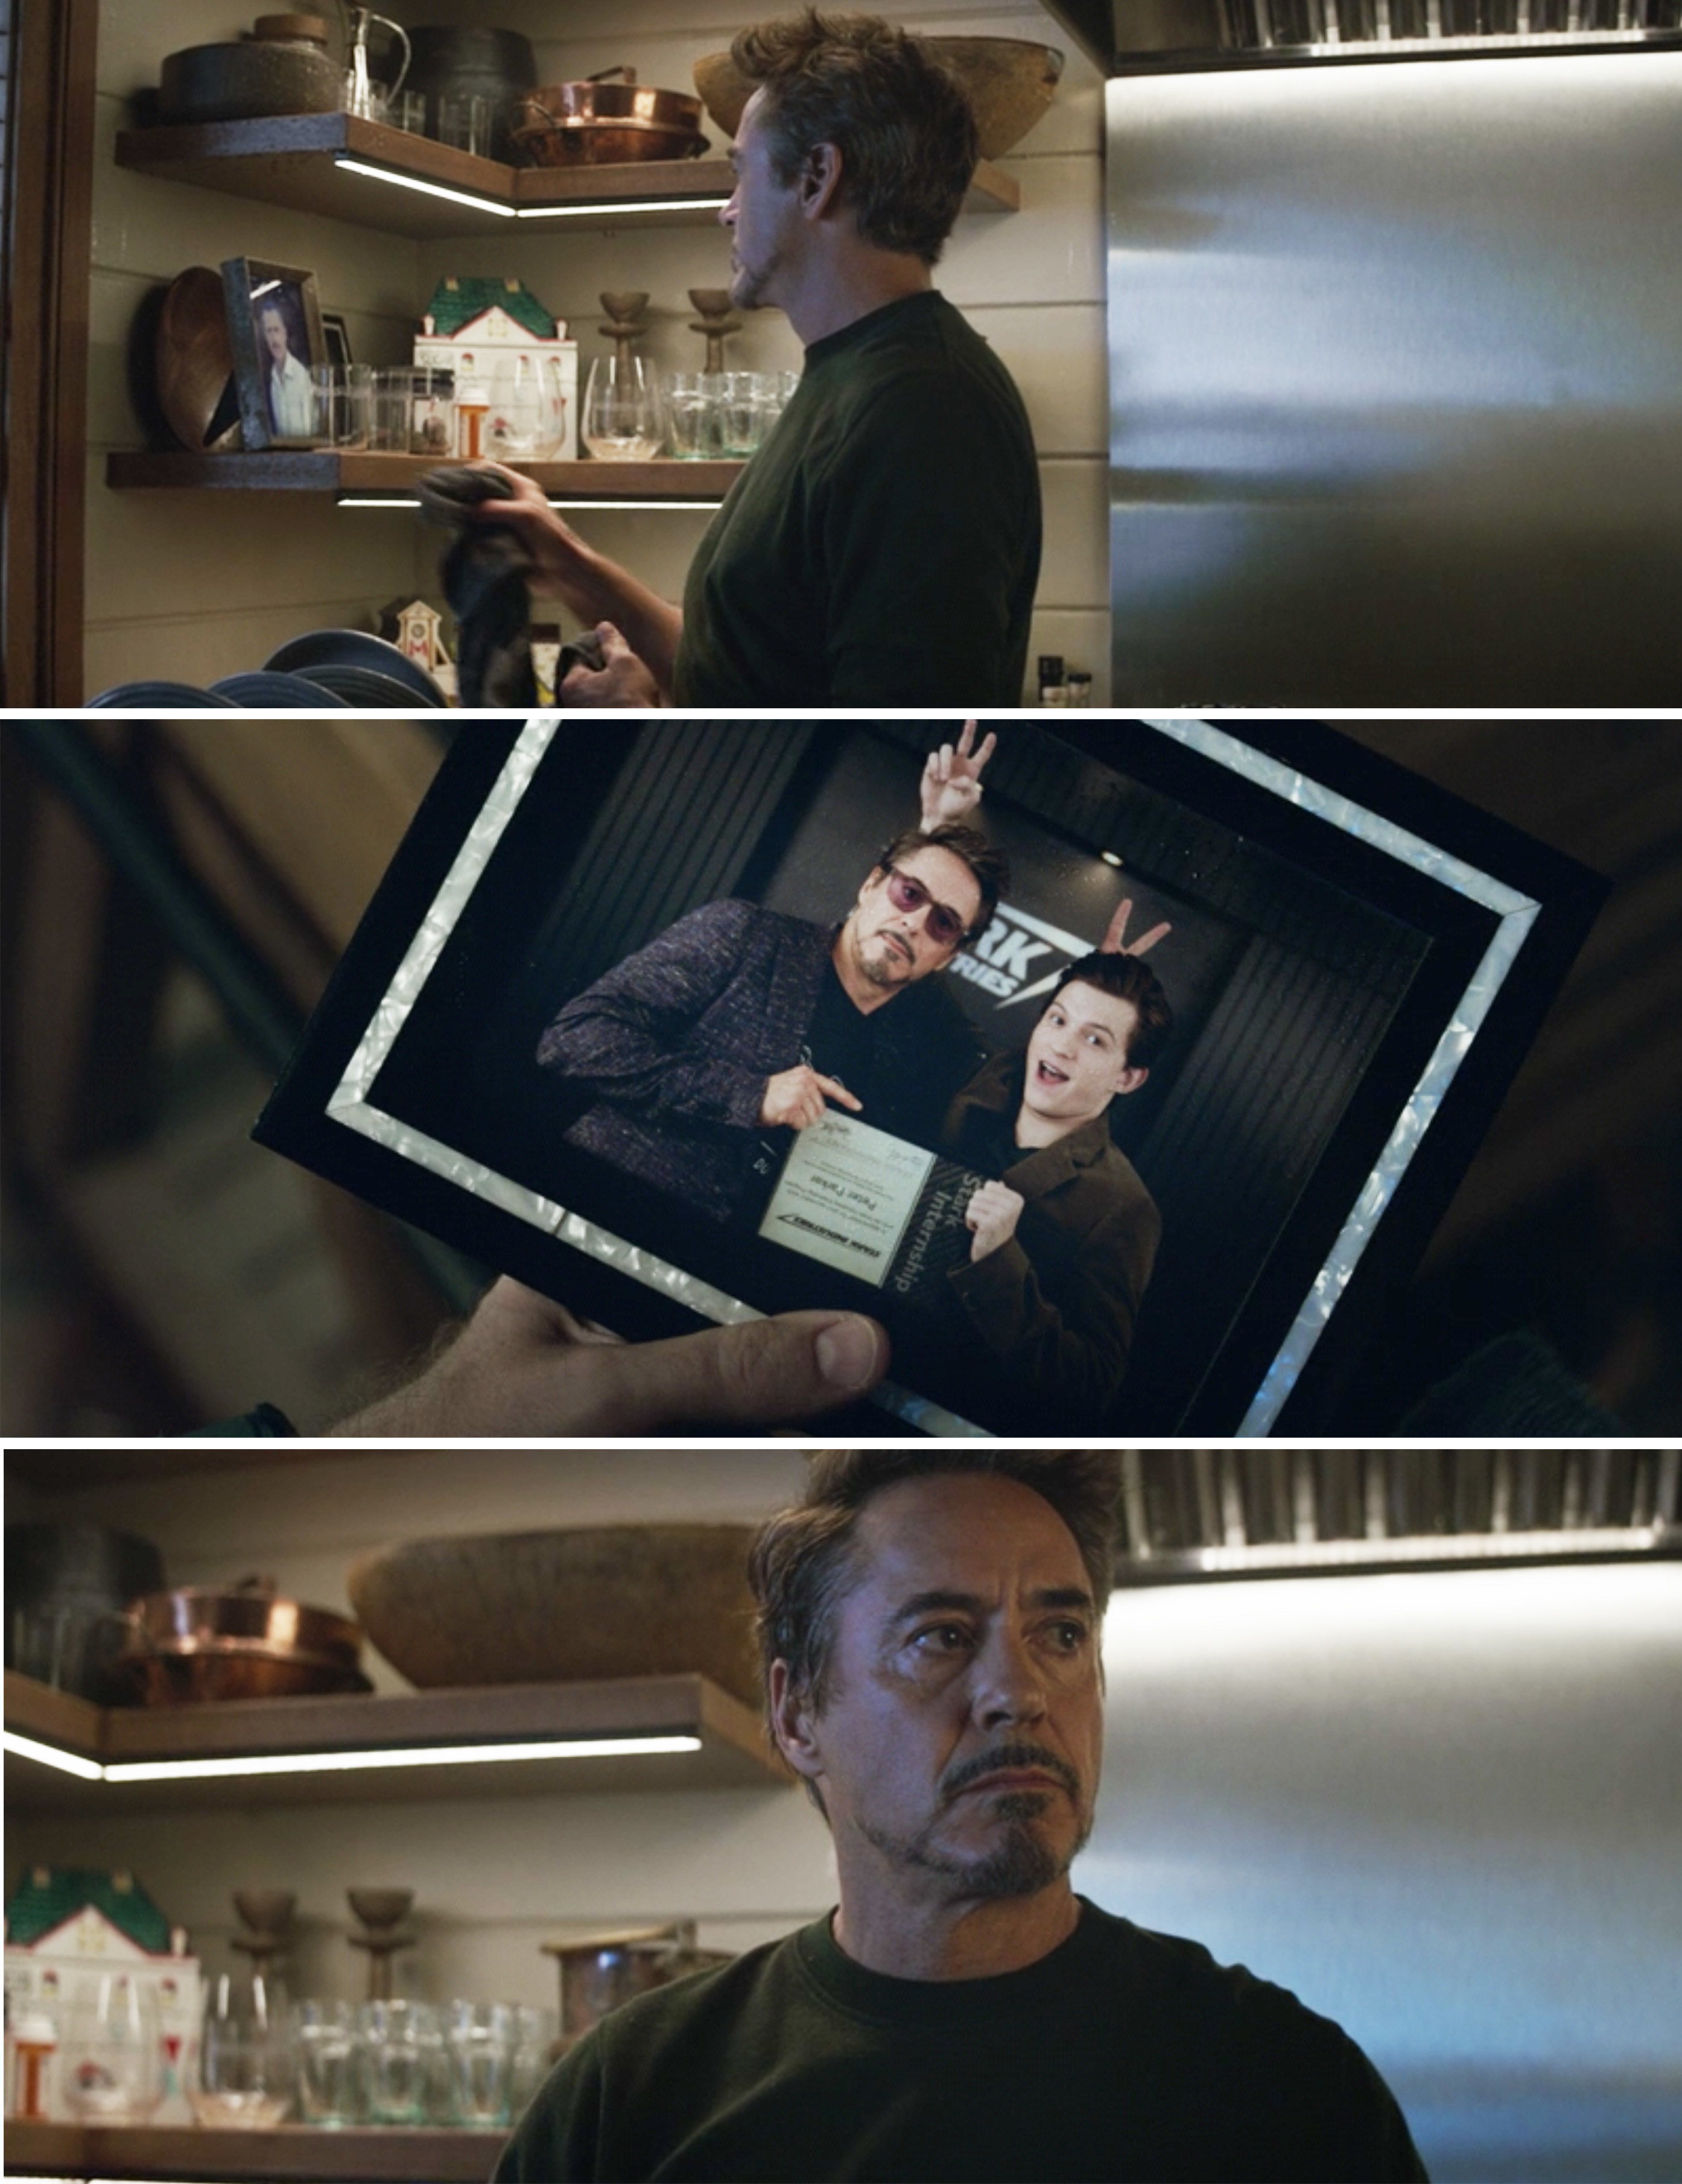 Tony looking at a picture of him and Peter giving each other bunny ears